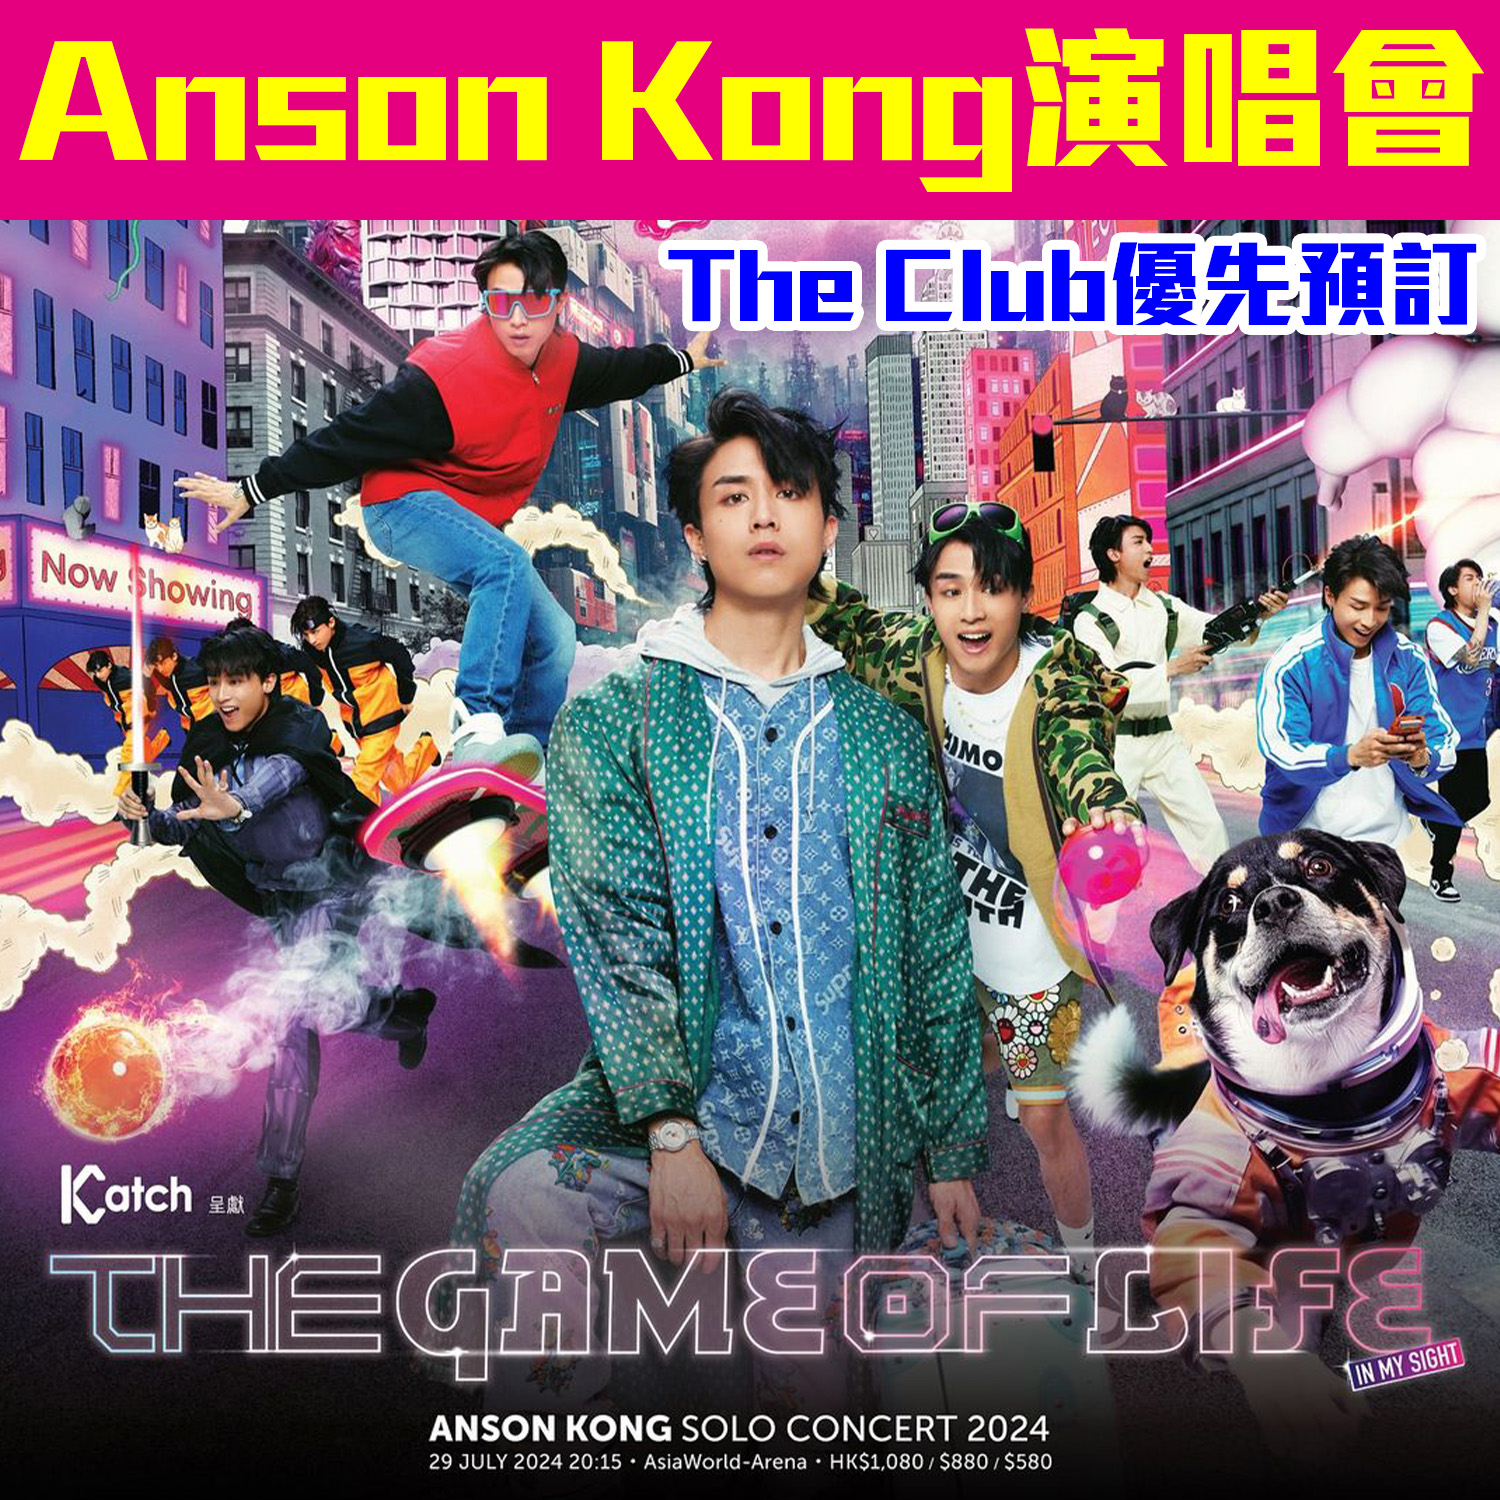 【AK演唱會】The Club優先預訂！ANSON KONG “THE GAME OF LIFE” IN MY SIGHT SOLO CONCERT 2024